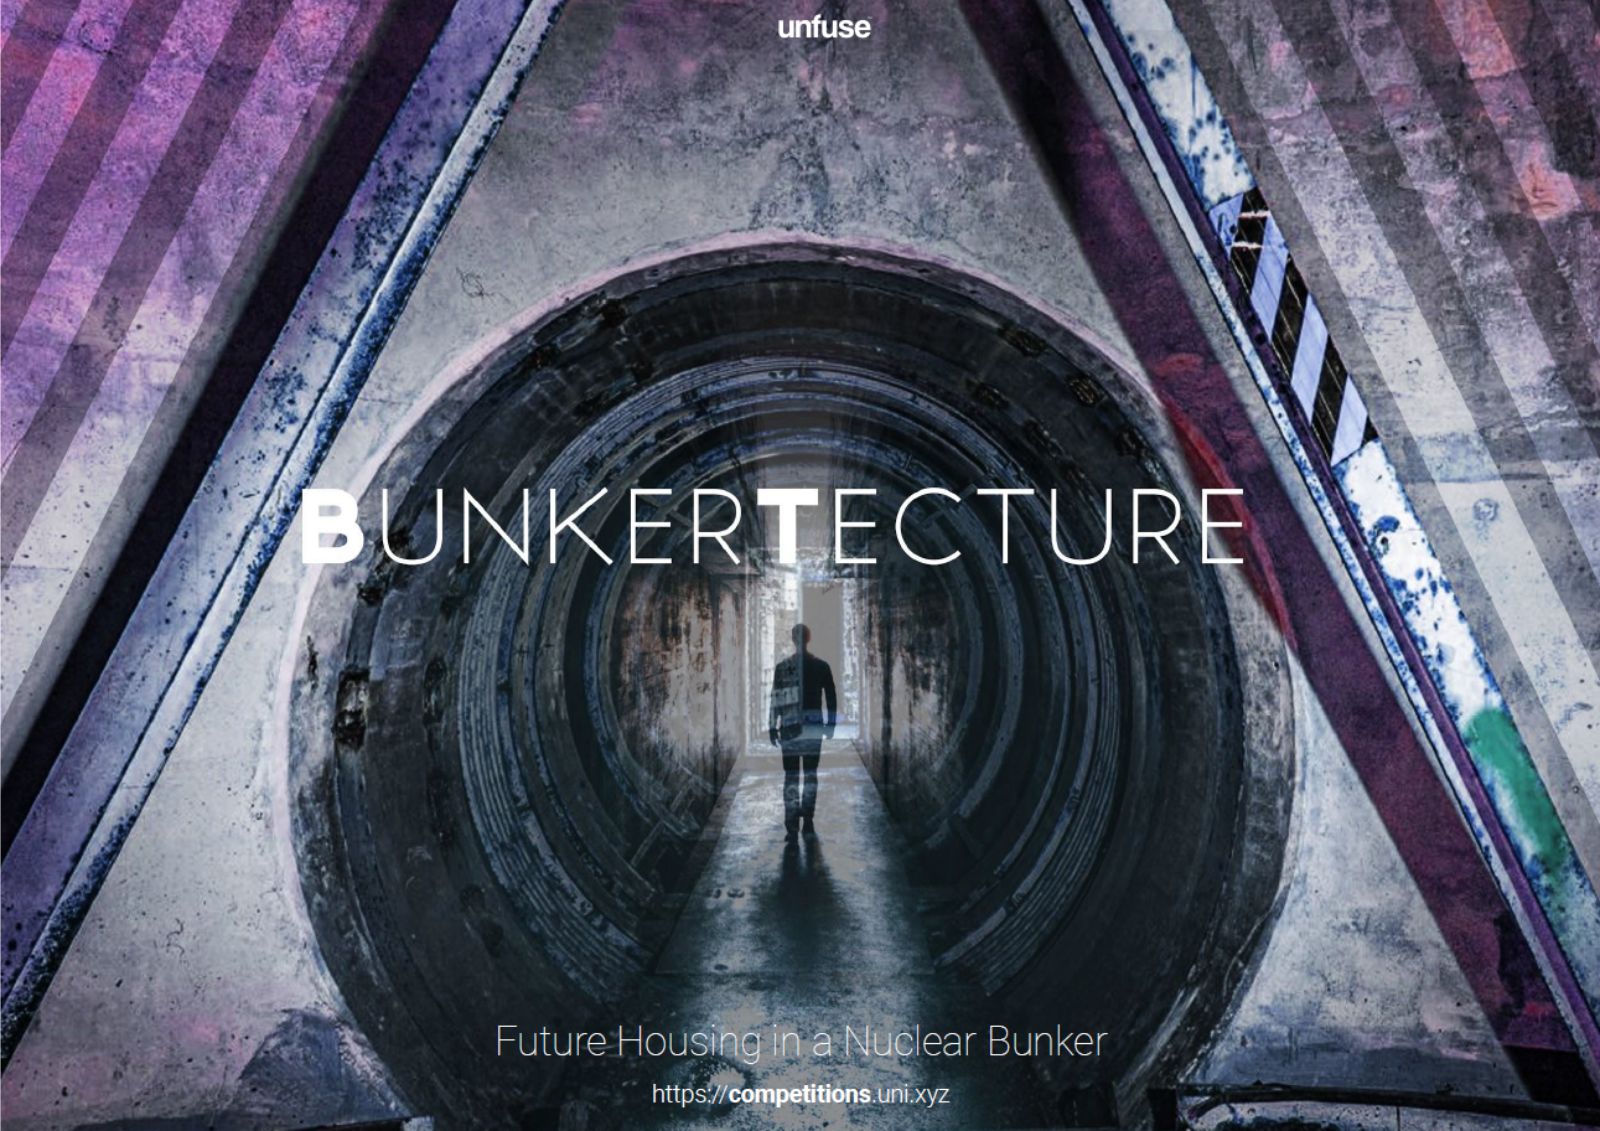 Bunkertecture